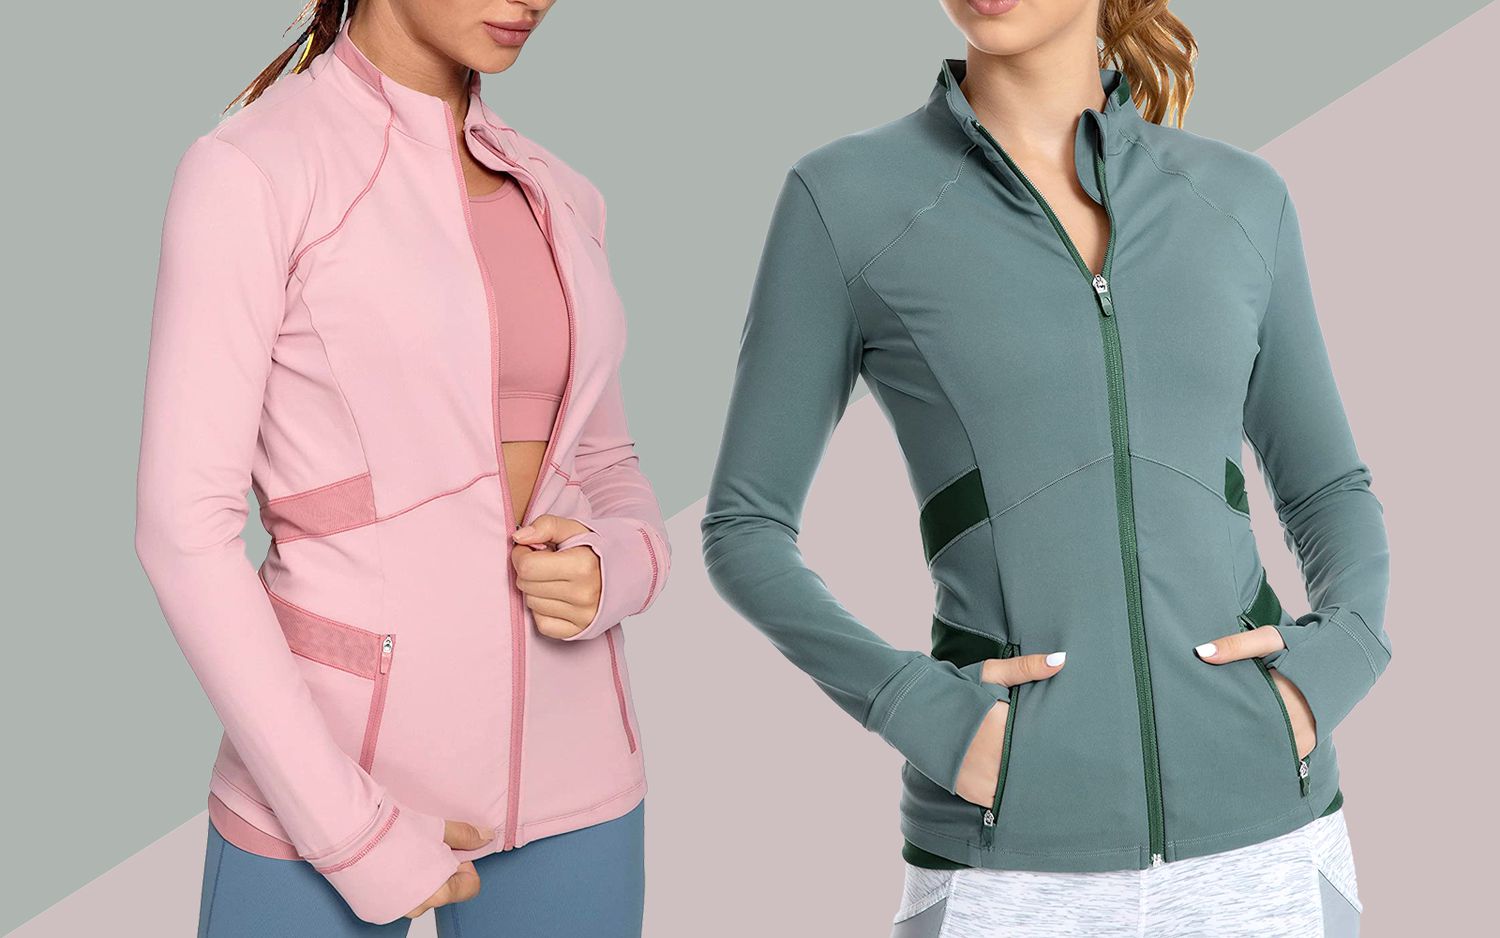 Revealing the Allure: The Ultimate in Athletic Fashion with the Lululemon Define Jacket